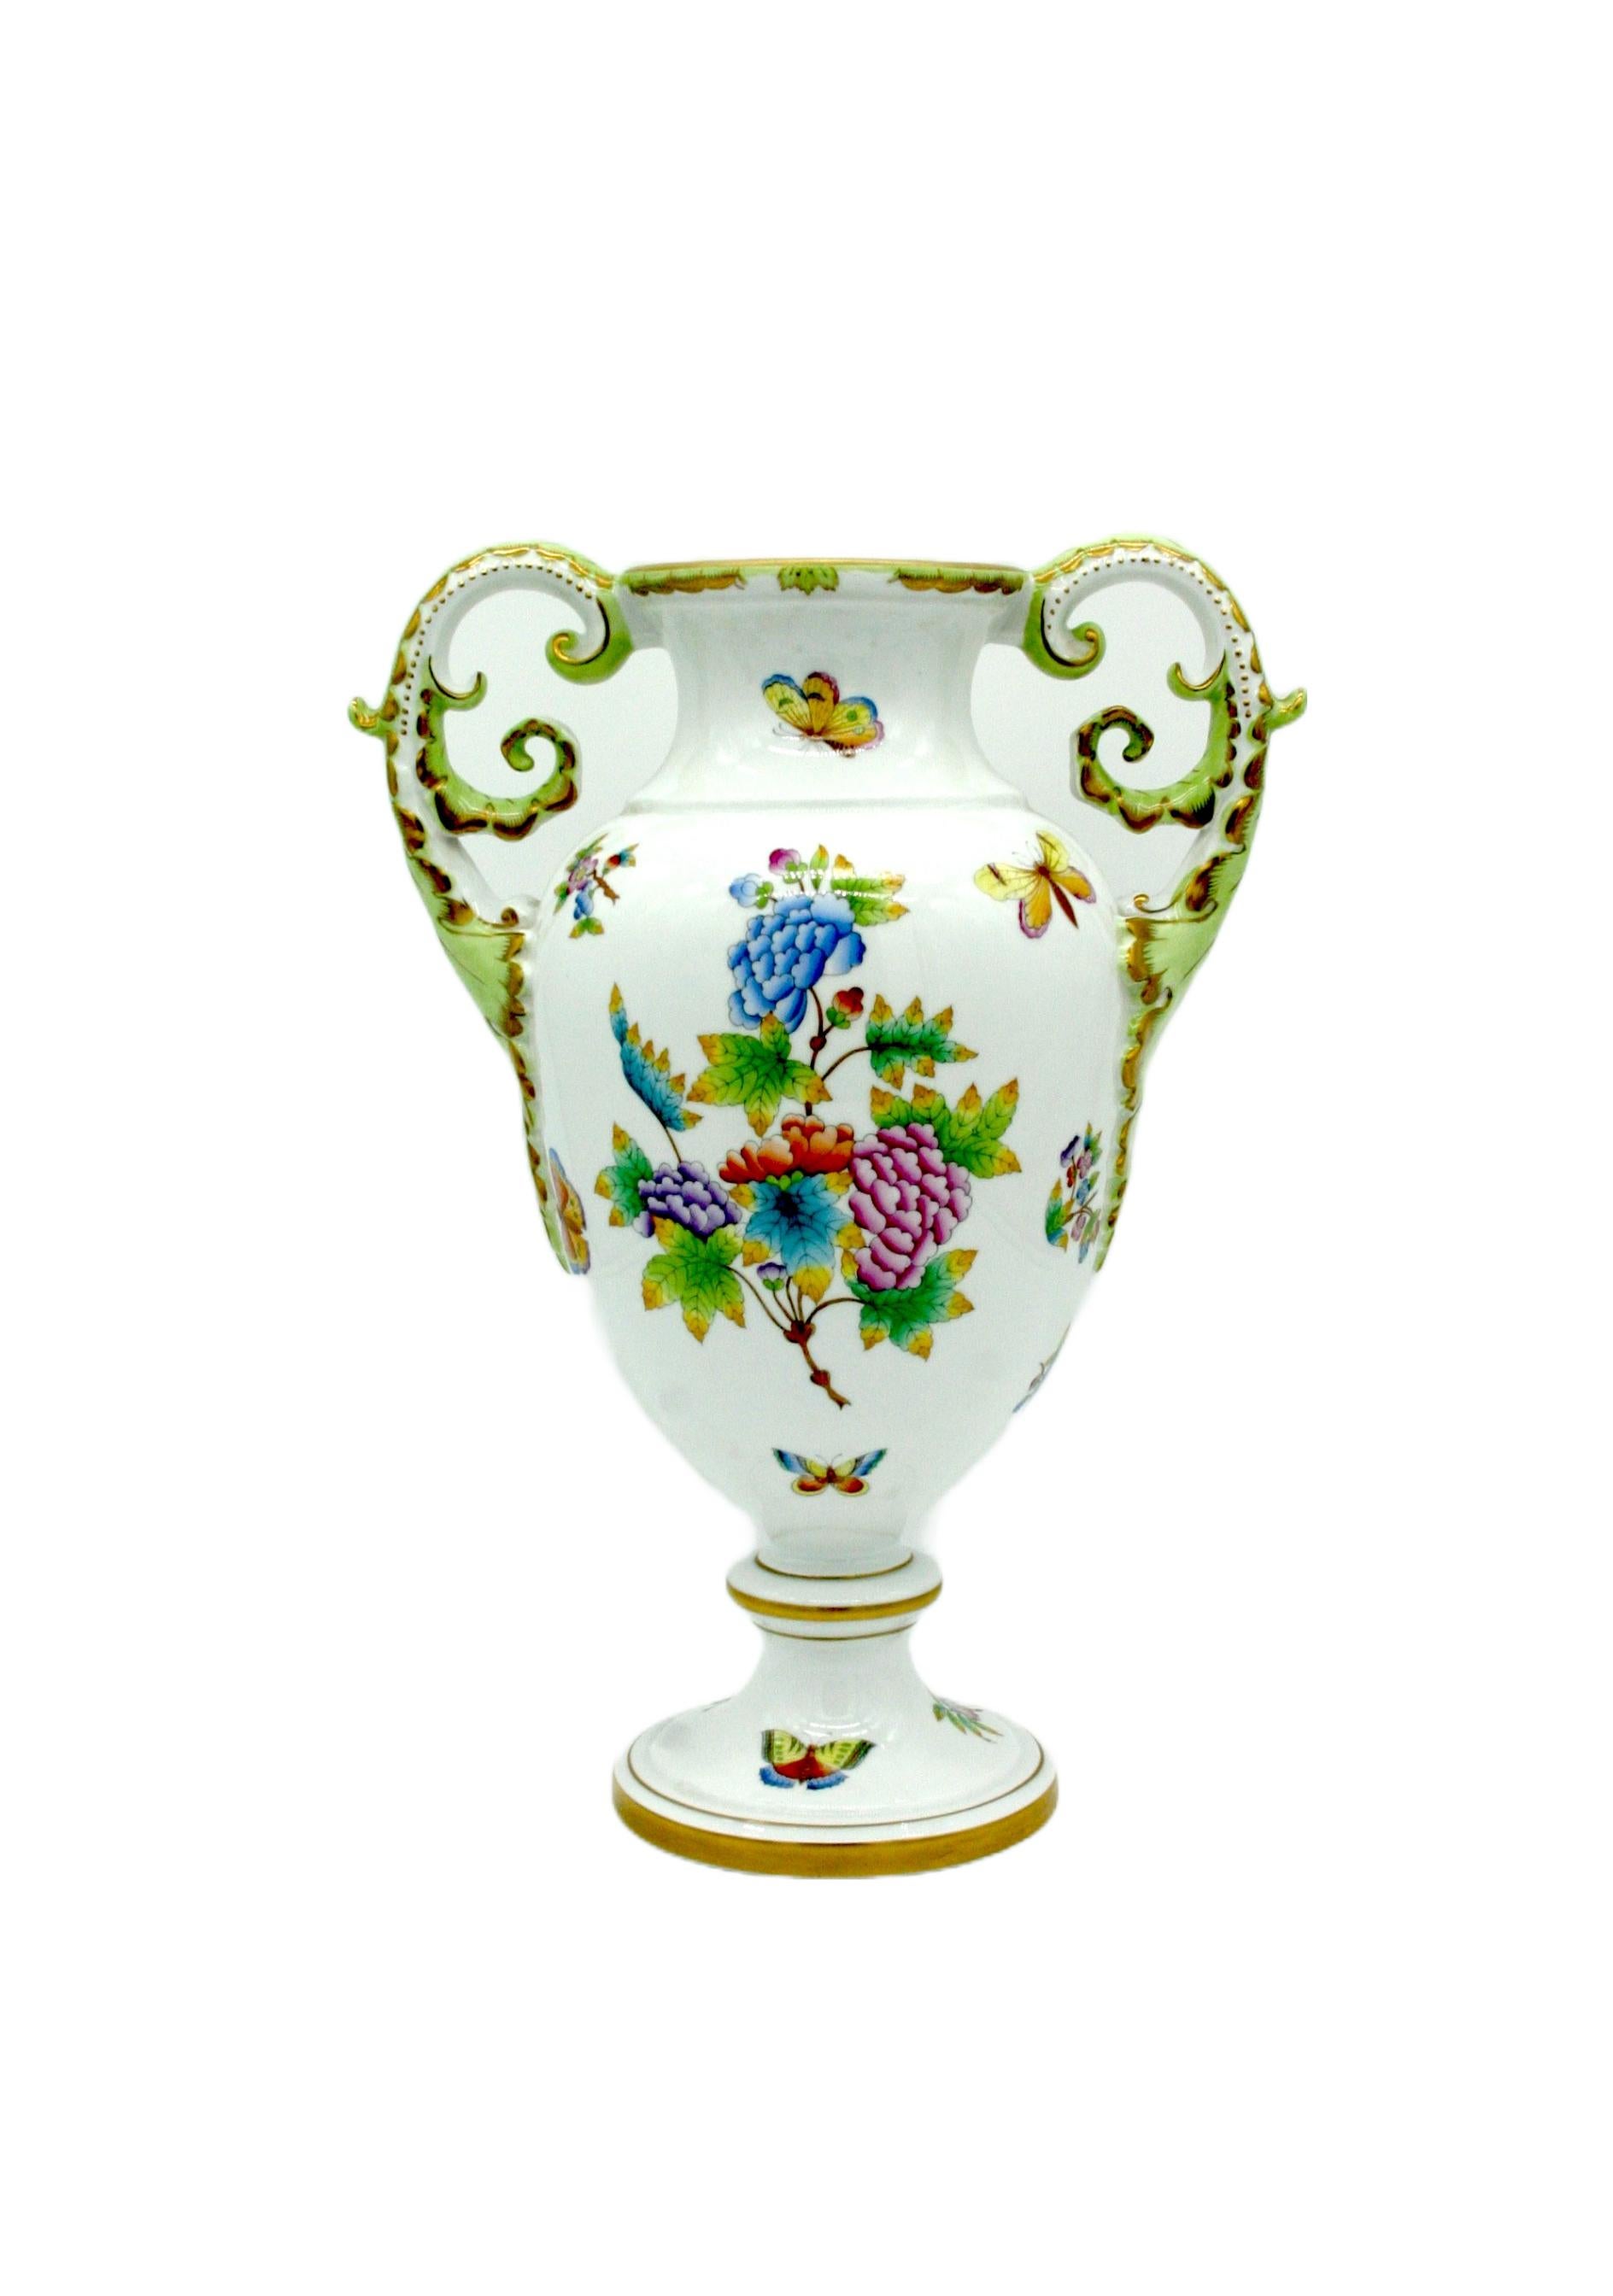 large decorative urns and vases